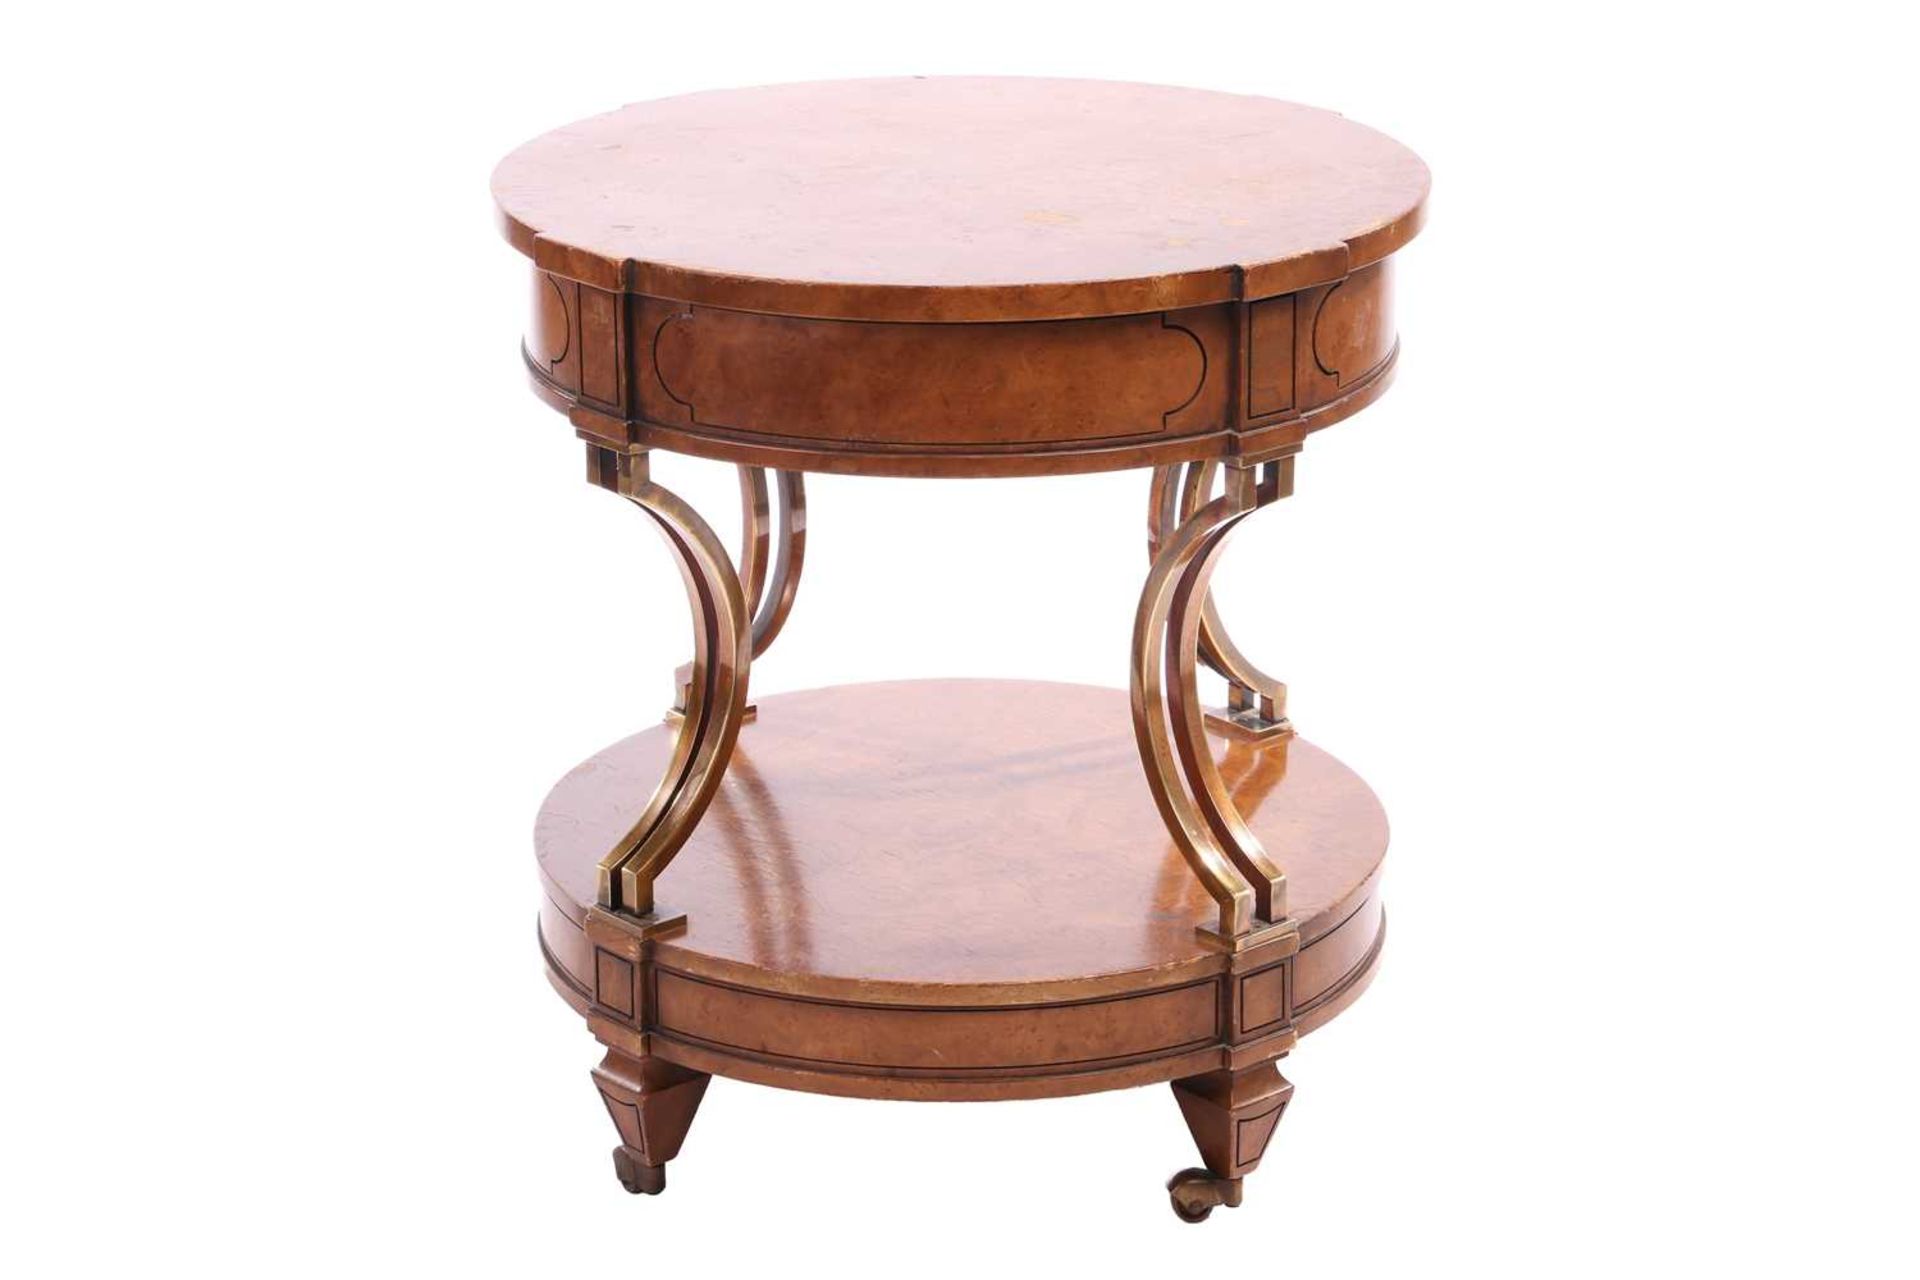 A French Empire-style two-tier drum burr walnut table with concave gilt brass supports over a confor